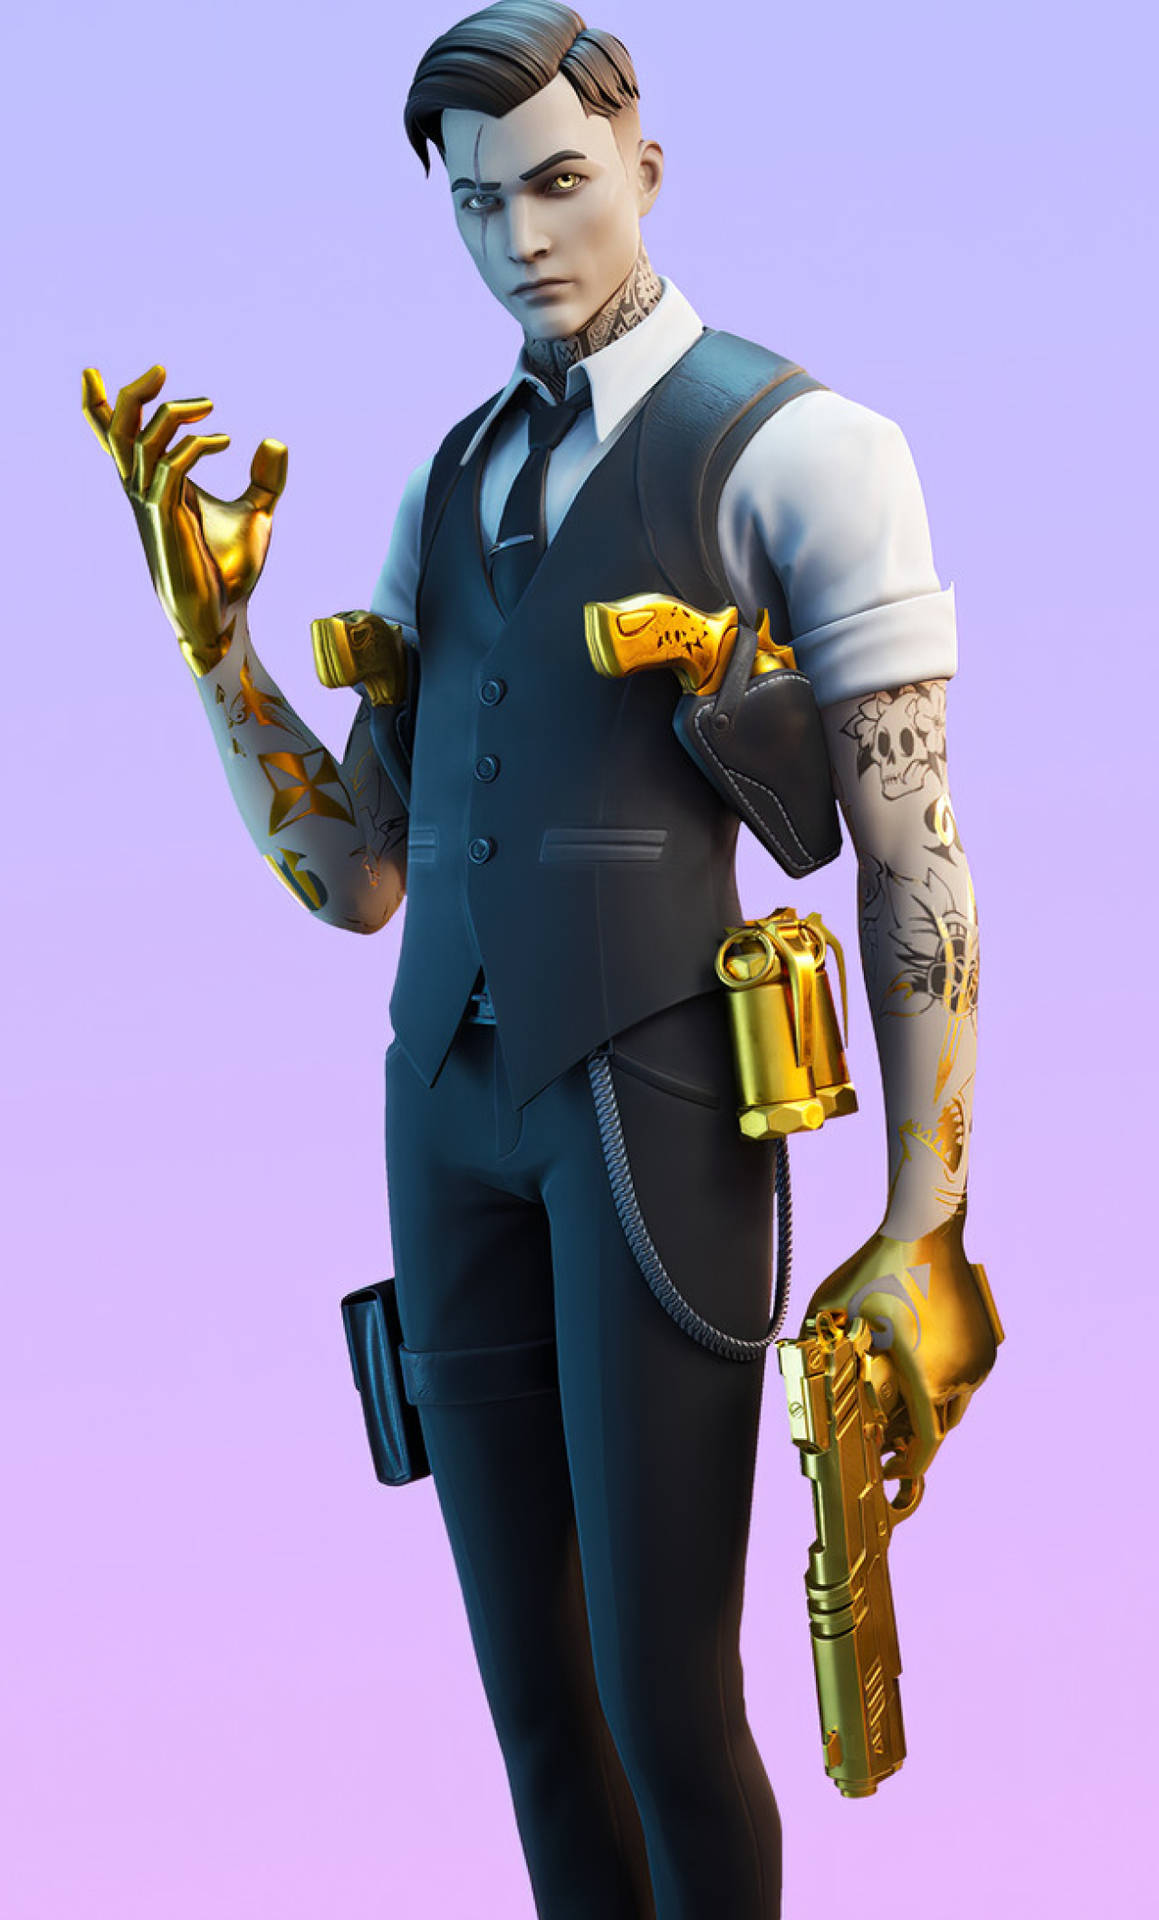 Get your hands on the Midas Fortnite Skin now! Wallpaper